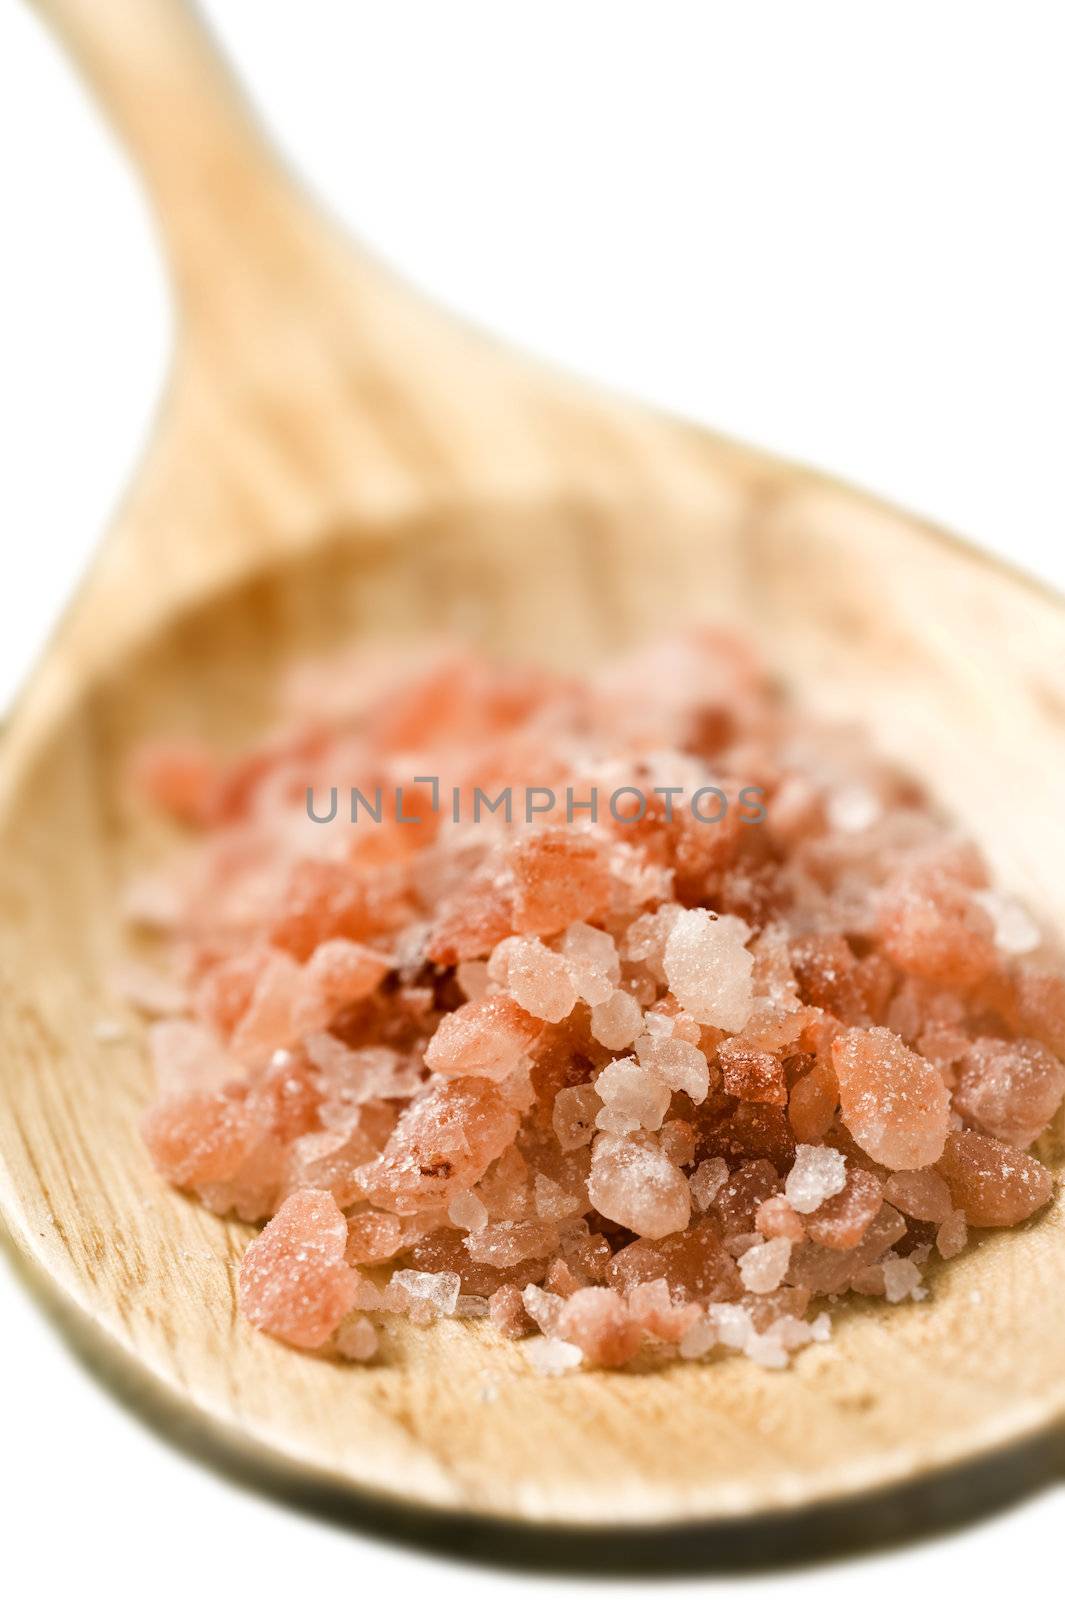 Pure himalayan salt on a wooden spoon